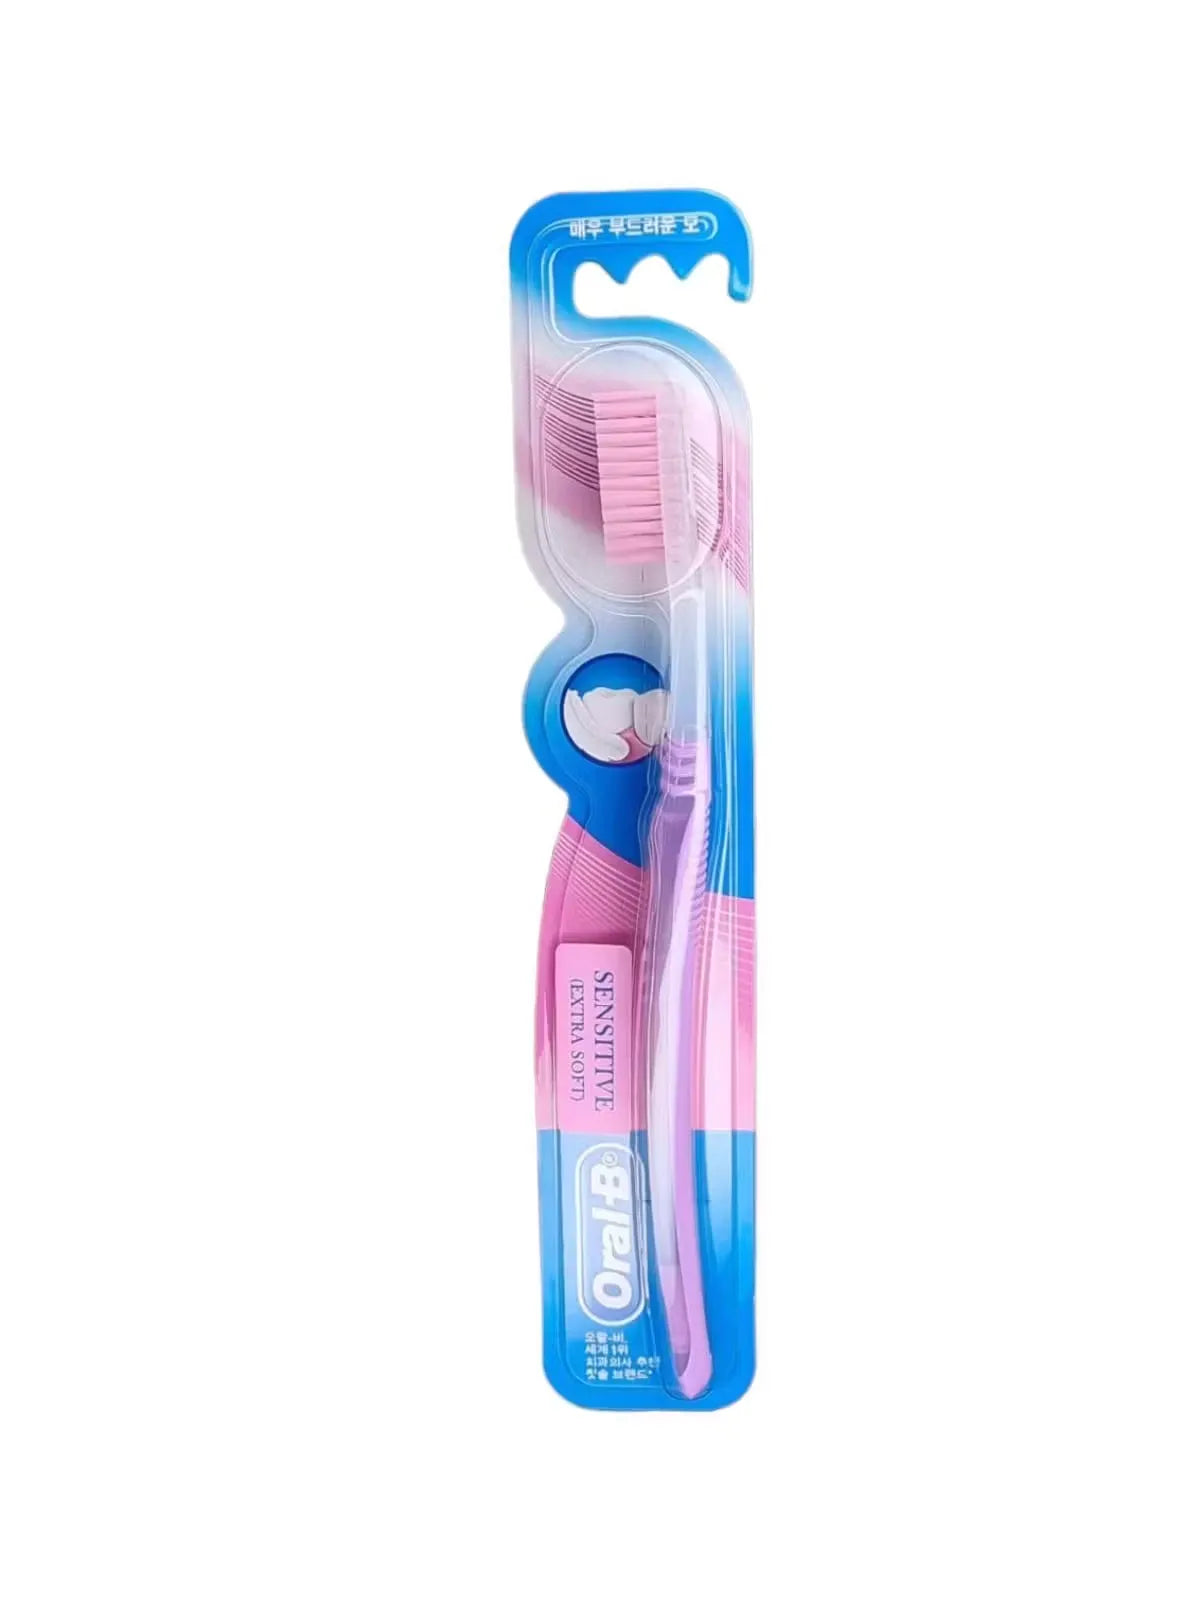 Close-up of Oral-B Sensitive Extra Soft toothbrush in a soothing purple shade. Features rounded bristles and ergonomic handle for comfortable cleaning.